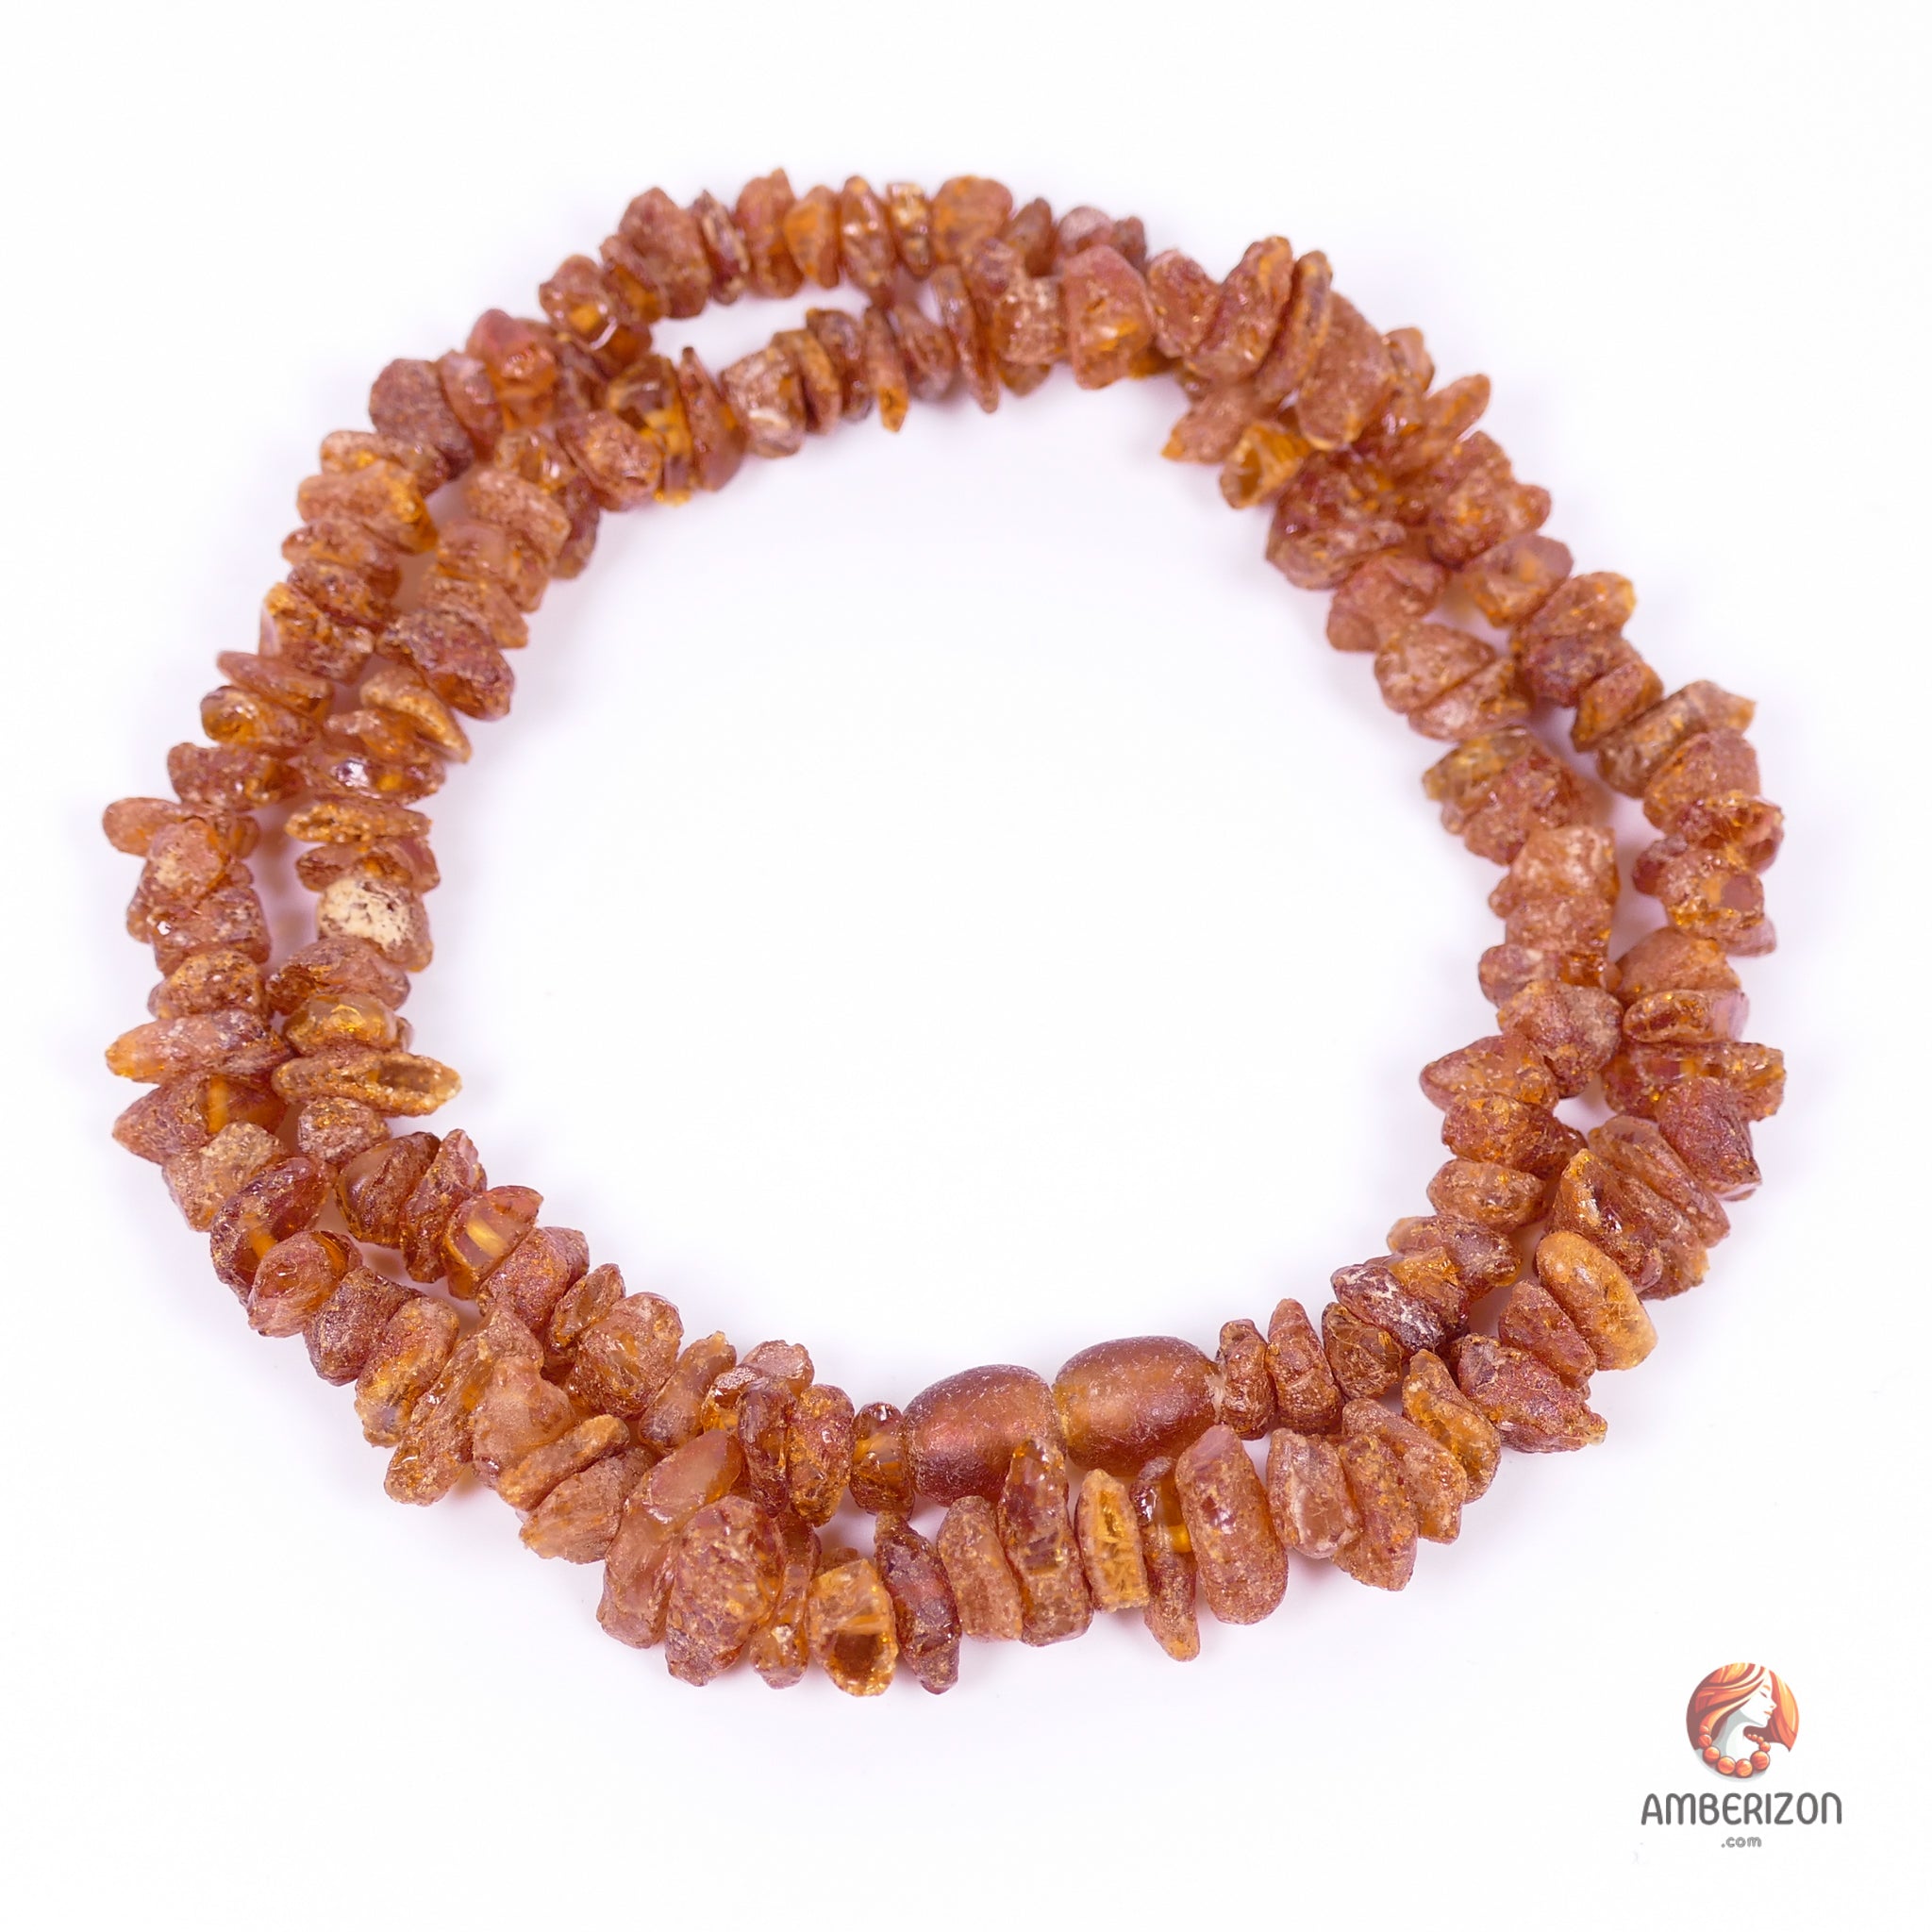 Amazon.com: DUOVEKT 12mm Natural Red Blood Amber Beads Bracelet for Women  Men Round Beads Healing Stone Gemstone Crystal Bracelet Jewelry AAAAA:  Clothing, Shoes & Jewelry